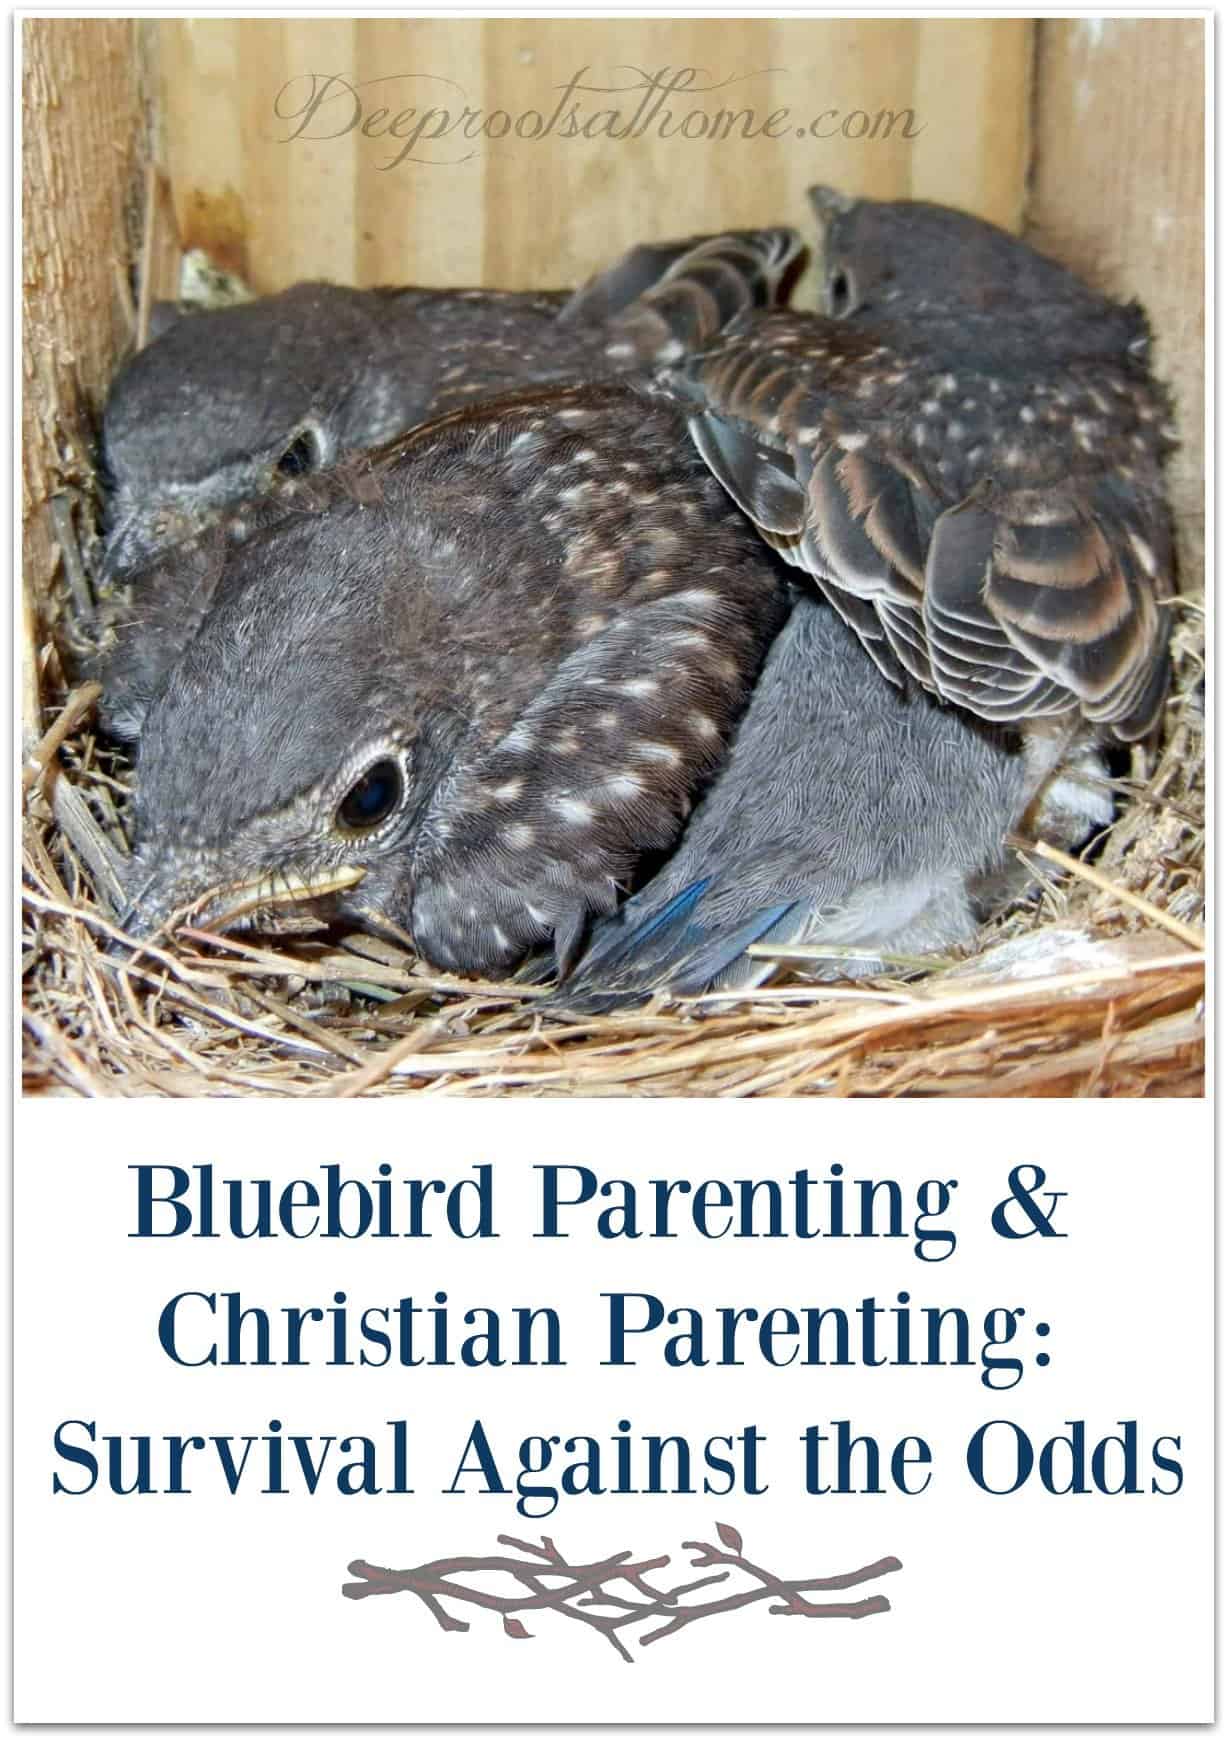 Bluebird & Christian Parenting: Survival Against the Odds